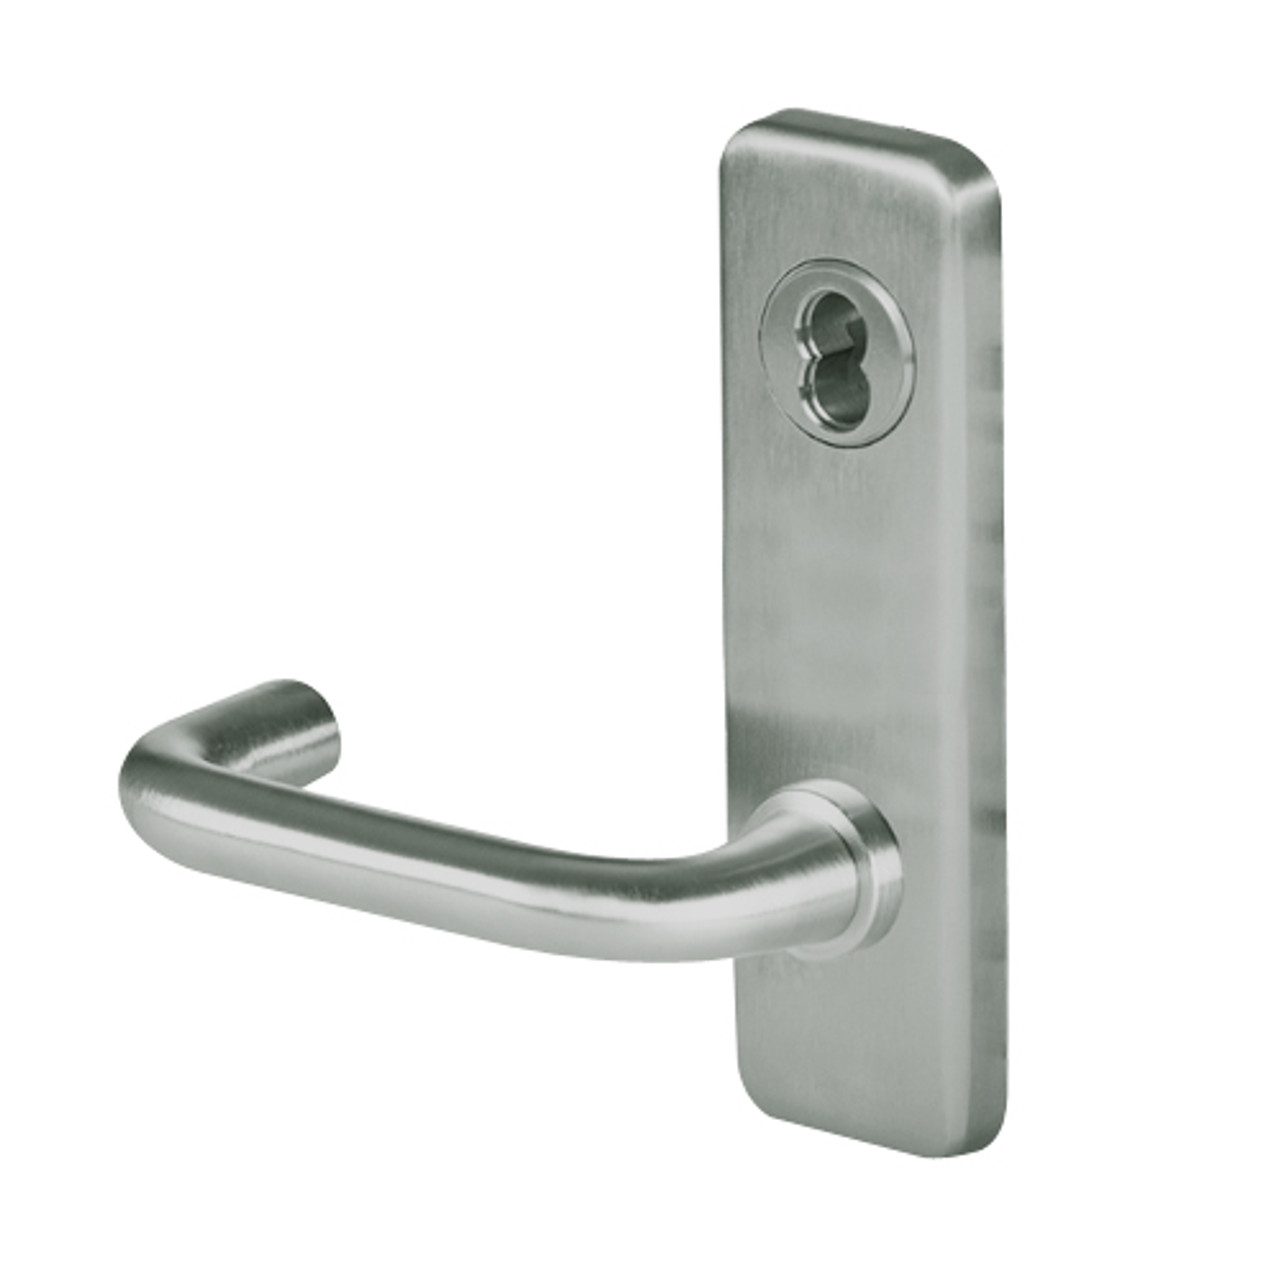 45H0NX3J619 Best 40H Series Exit Function Heavy Duty Mortise Lever Lock with Solid Tube Return Style in Satin Nickel